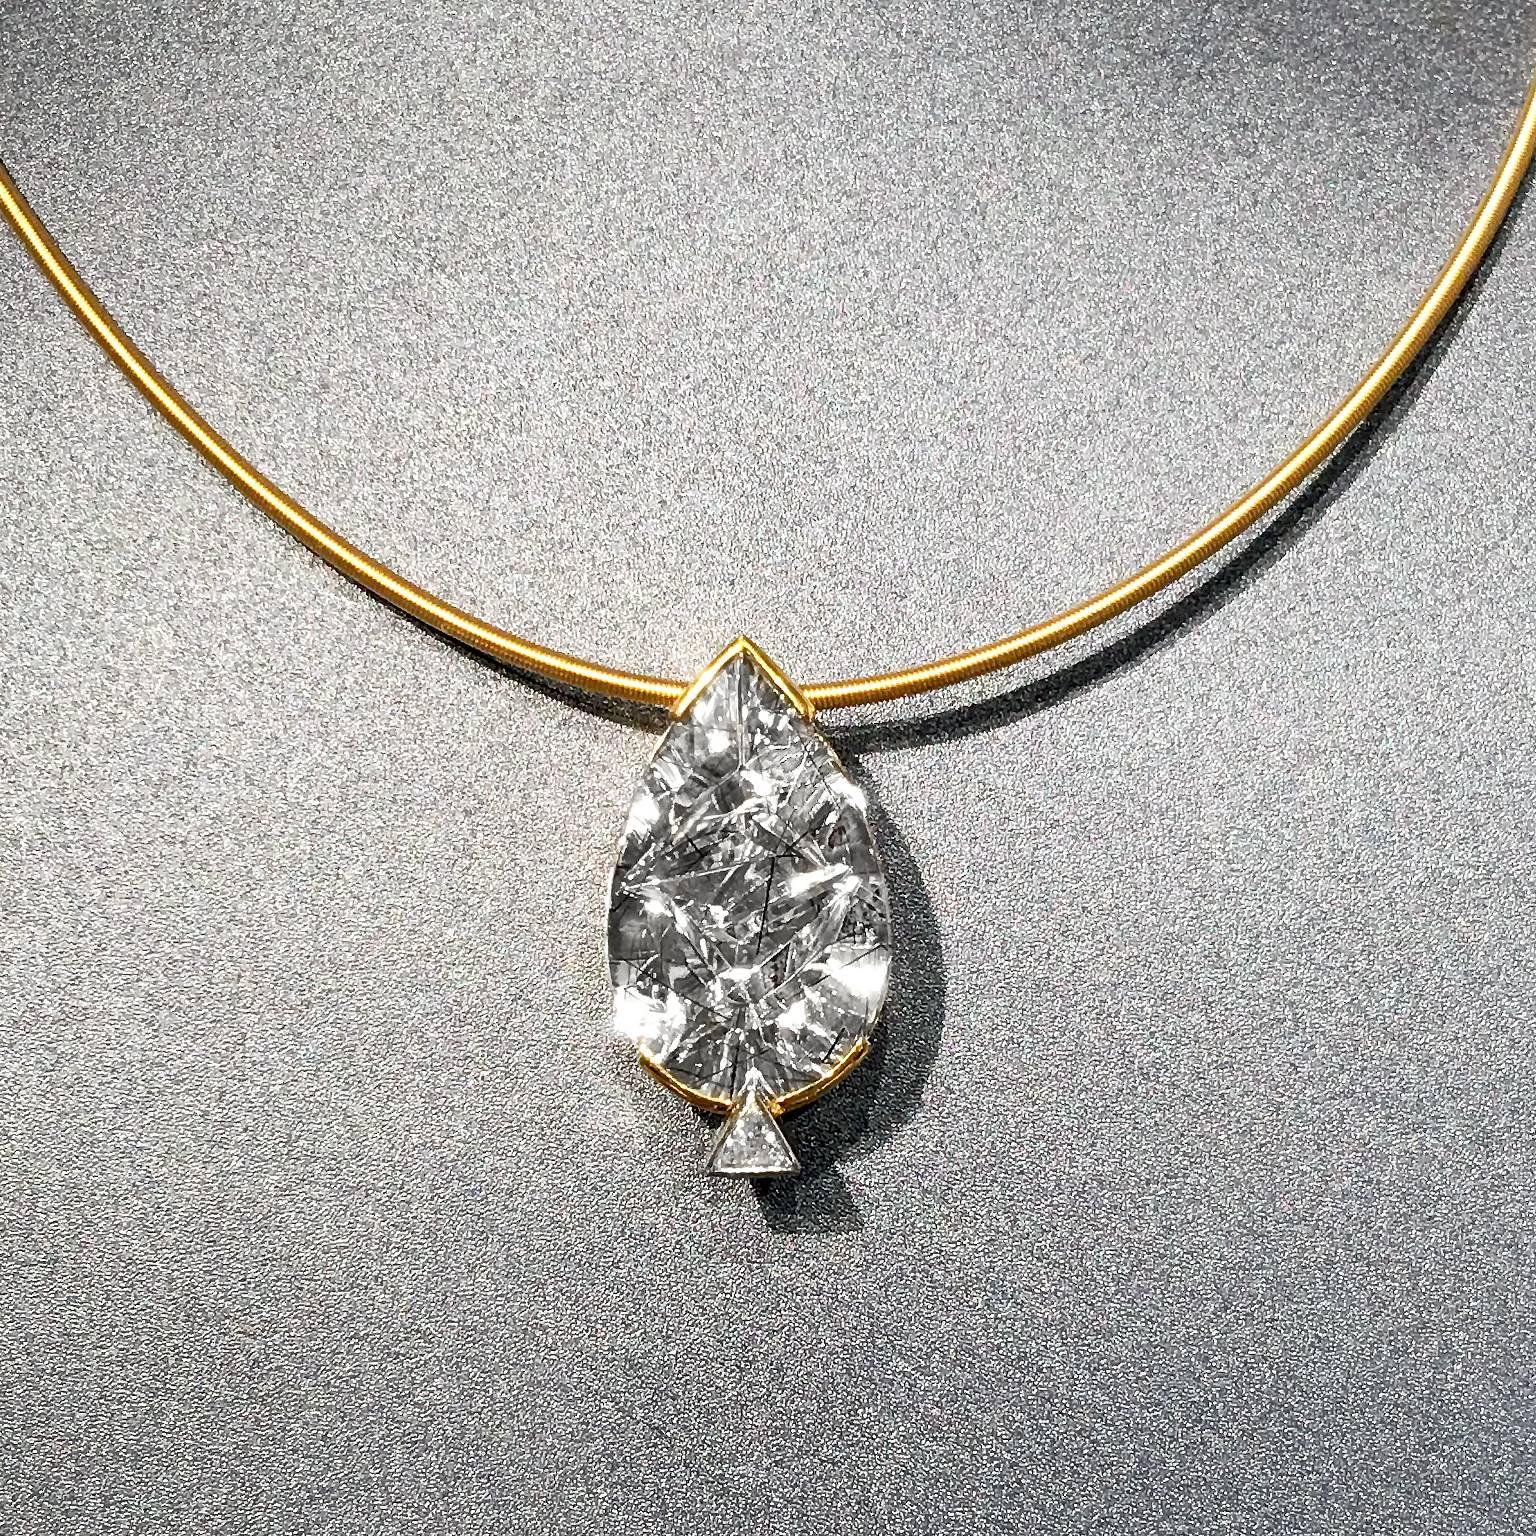 One of a Kind Pendant Necklace showcasing a 13.98 carat 